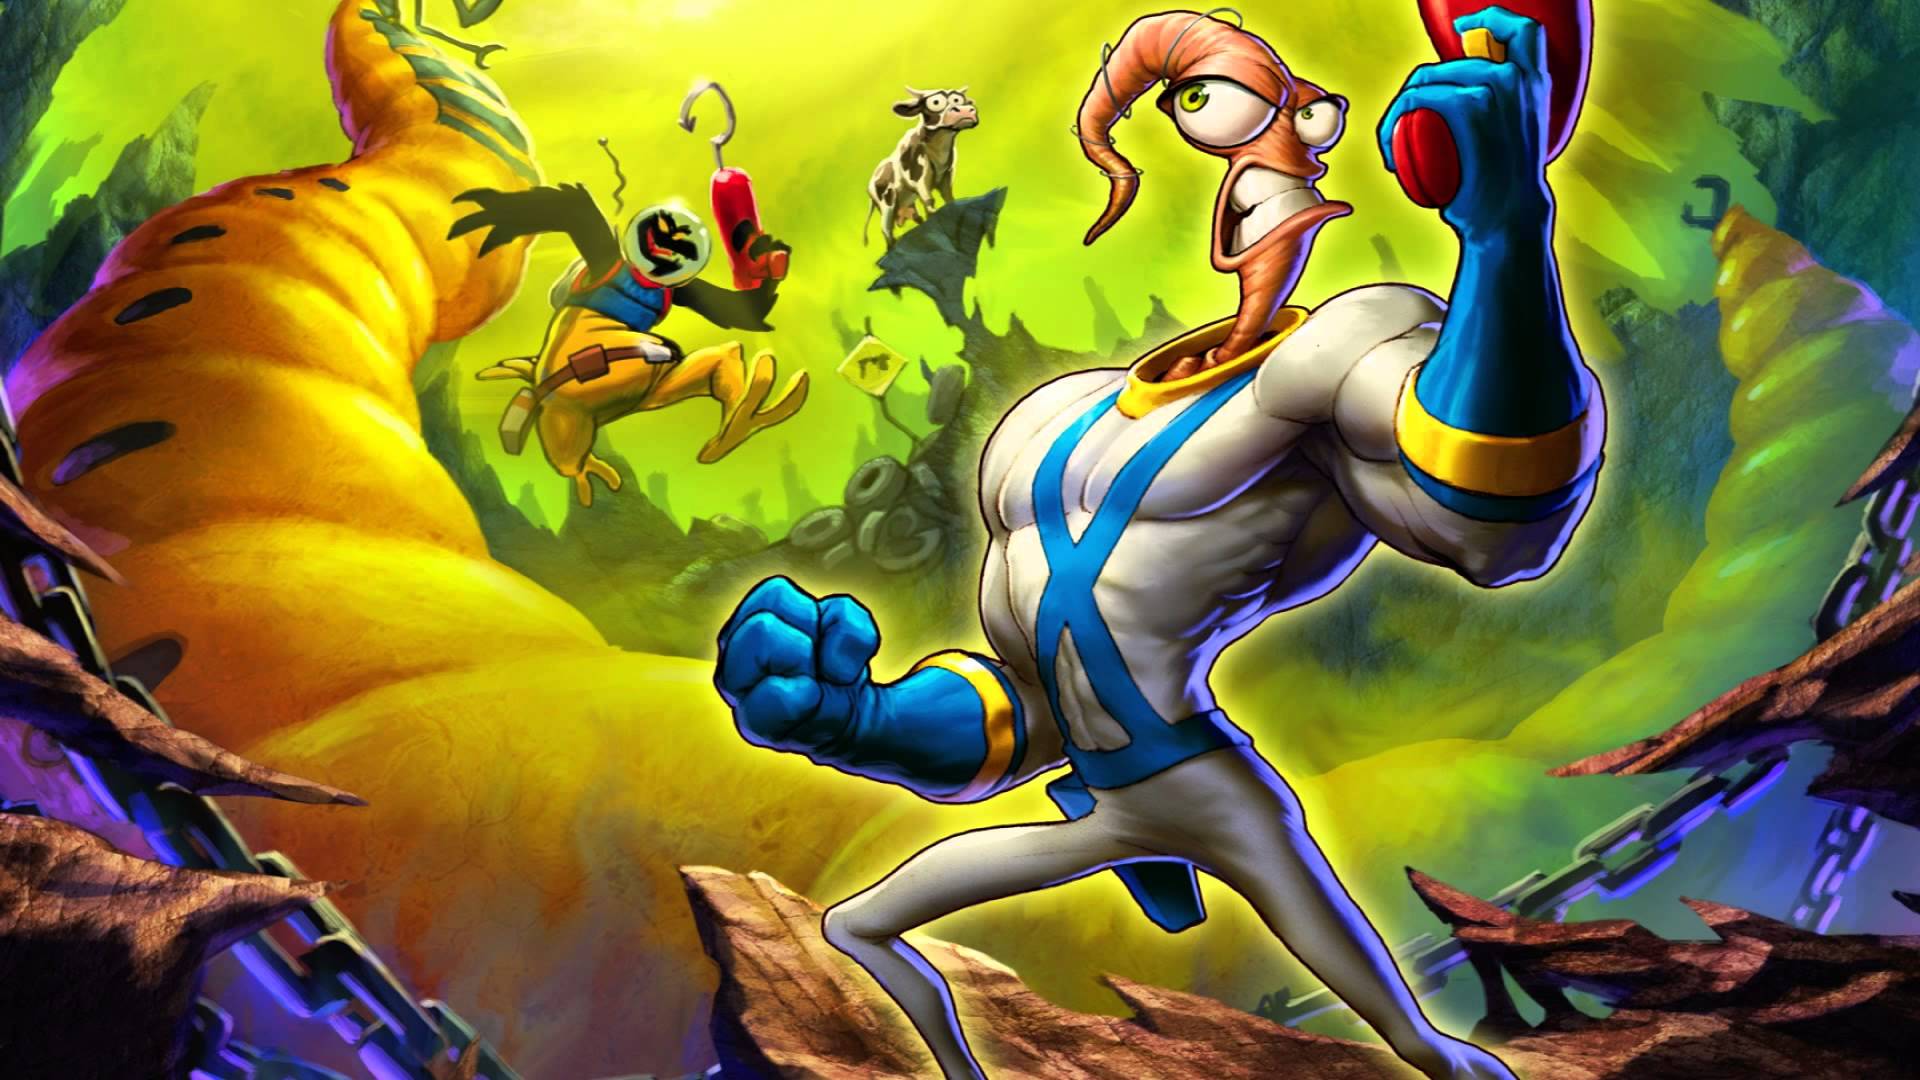 Earthworm Jim returns exclusively for the new Intellivision Amico console